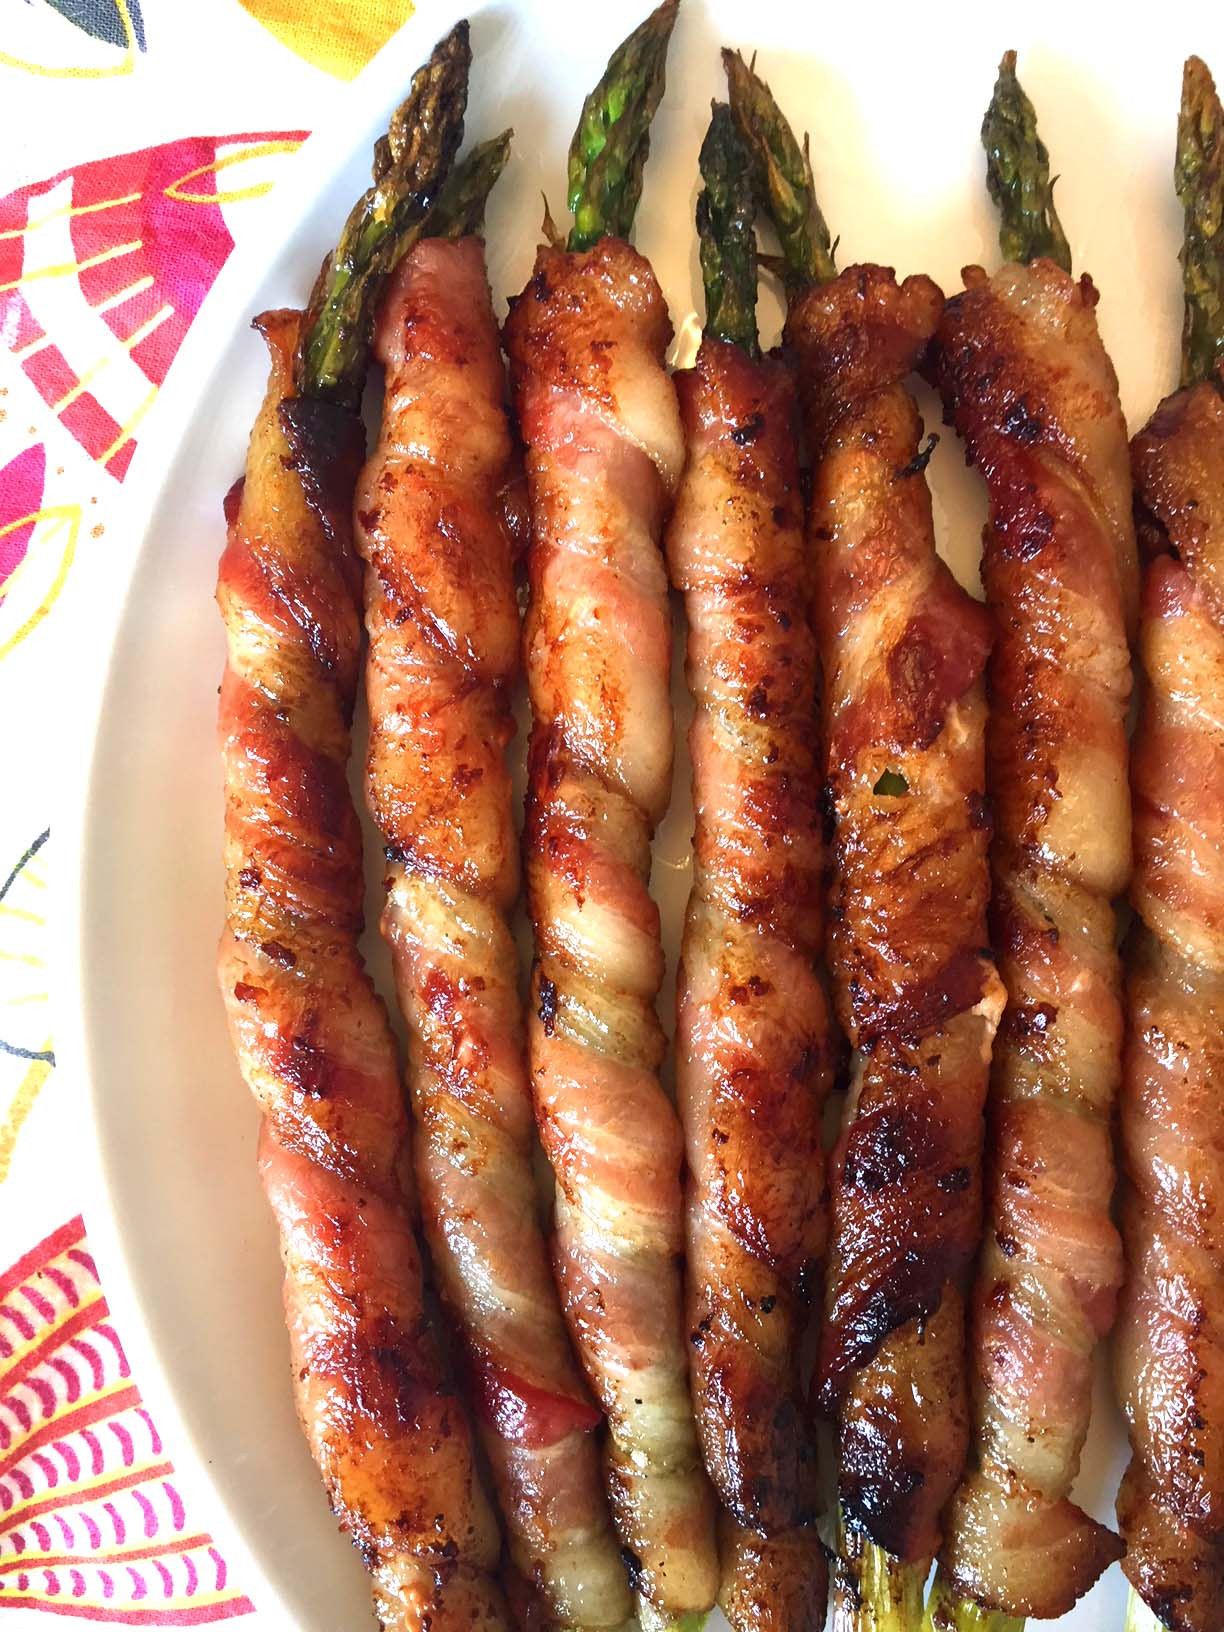 Asparagus Appetizers Recipe Lovely Bacon Wrapped asparagus Appetizer Recipe – Melanie Cooks